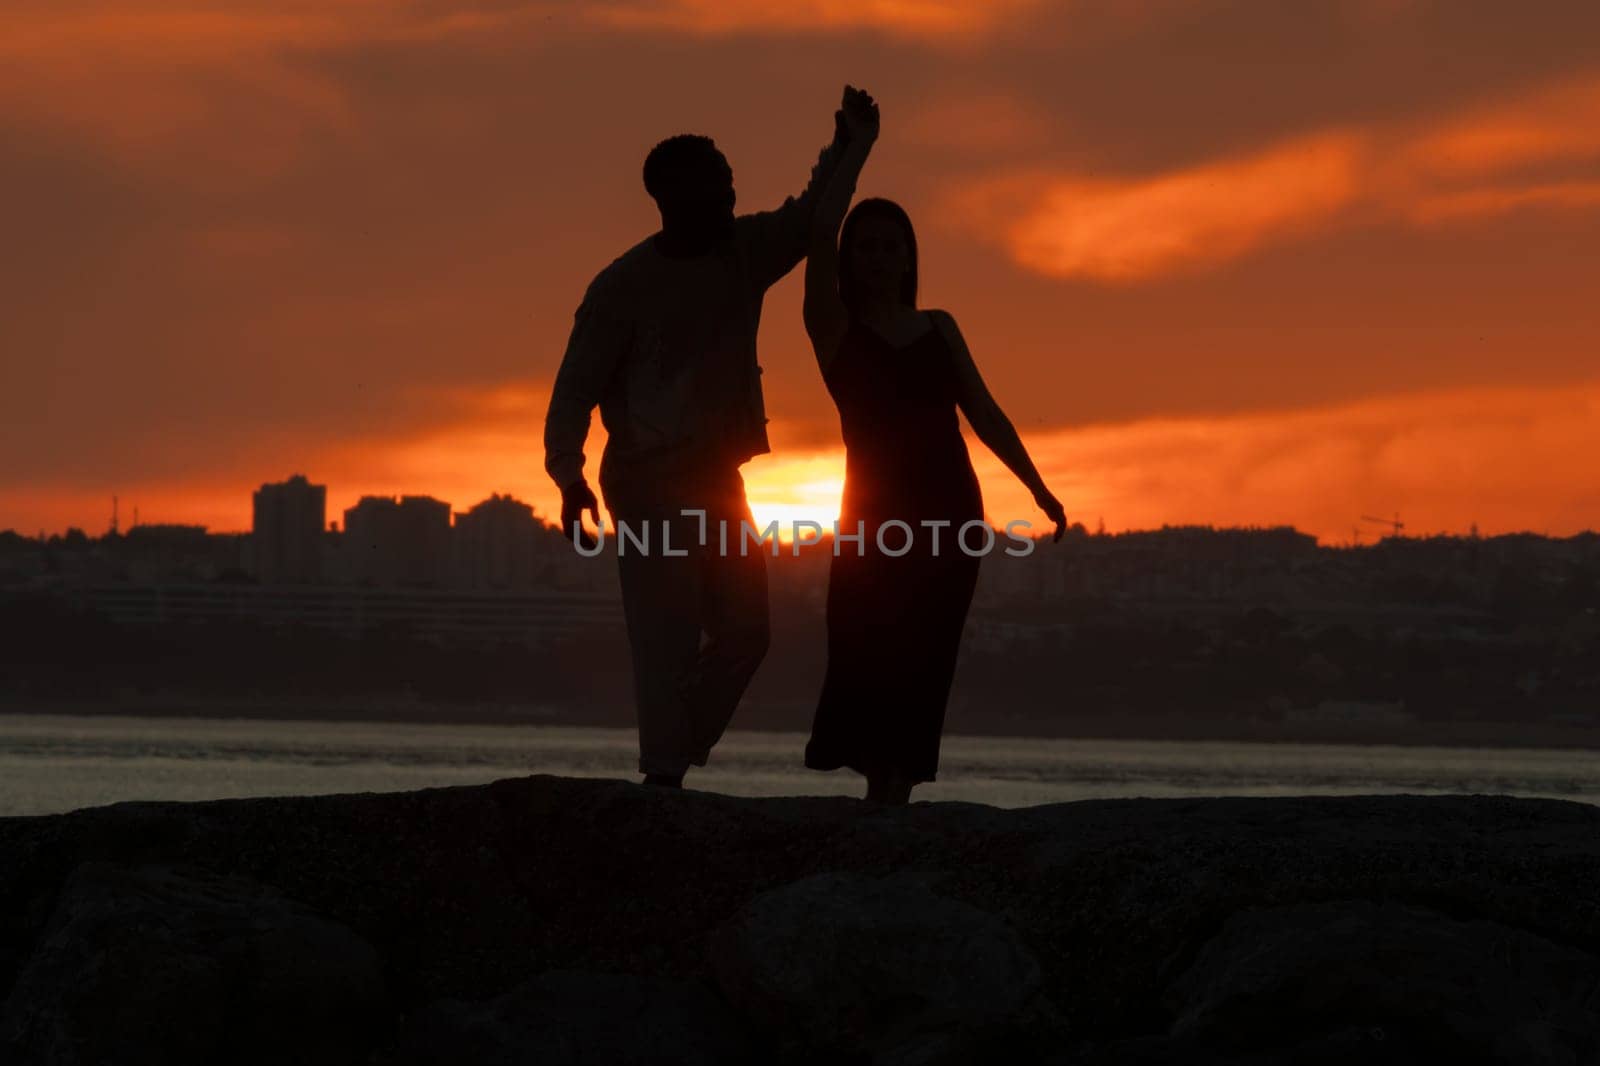 A couple dancing in the sunset. The man is holding the woman's hand. The woman is wearing a black dress